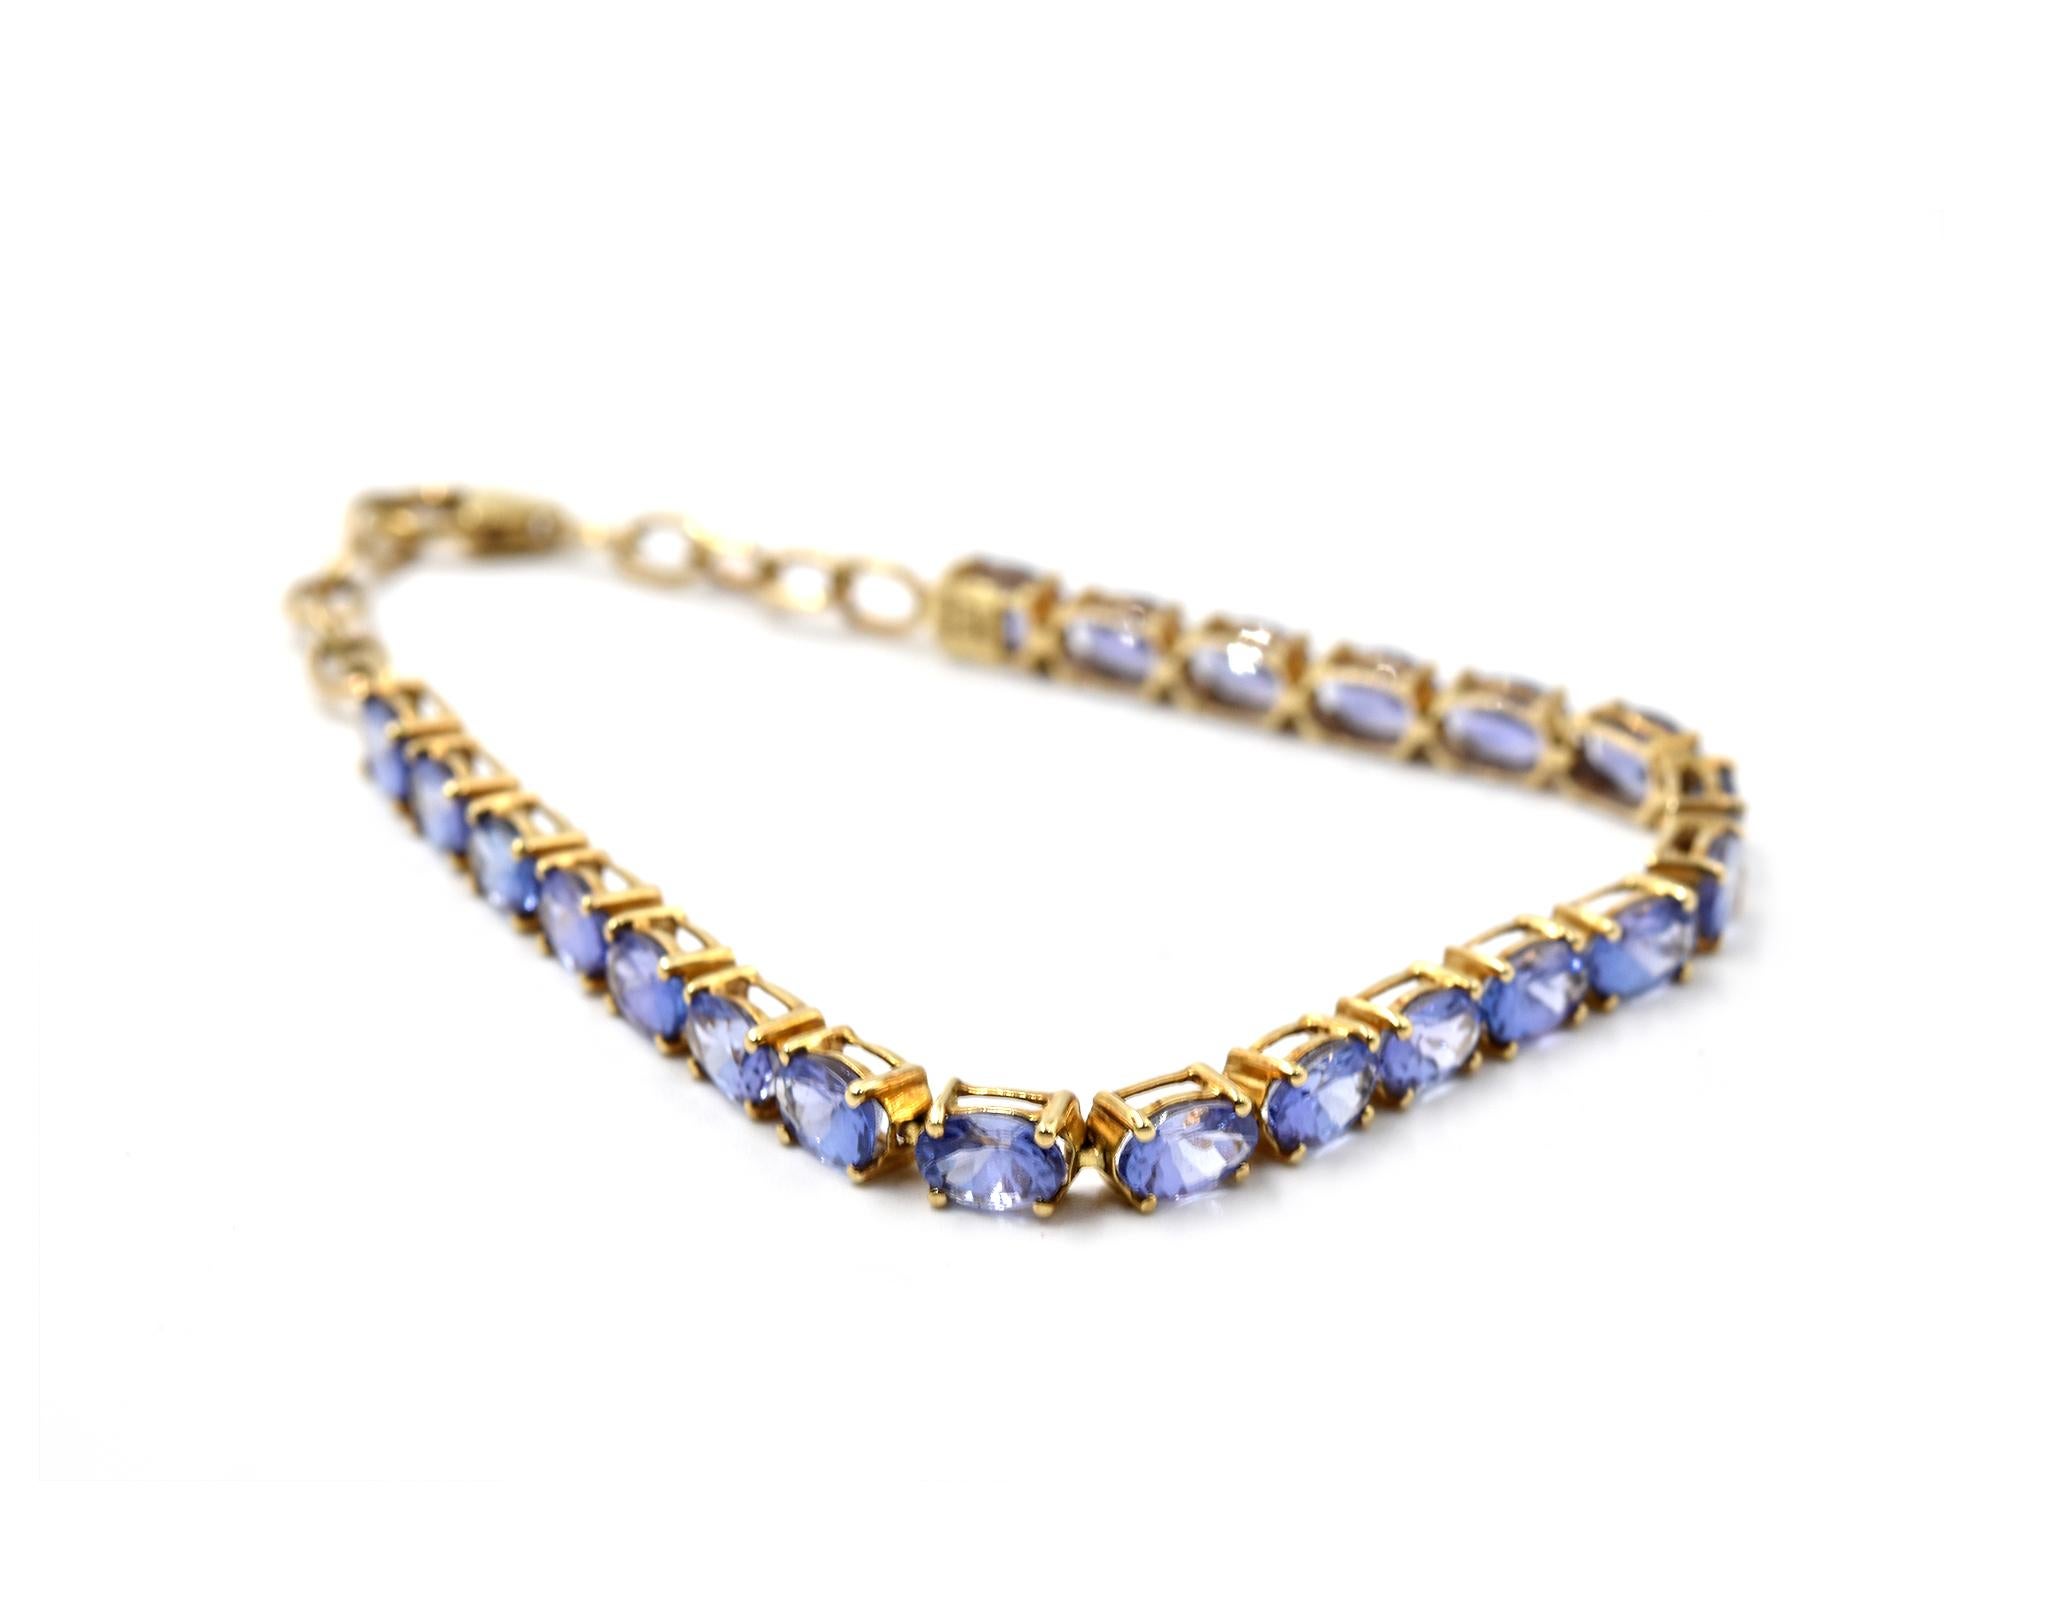 Designer: custom design
Material: 10k yellow gold
Tanzanite: 21 oval cut = 2.31 carat total weight
Dimensions: bracelet is 7 1/4-inch long and 1/8-inch wide 
Weight: 6.99 grams
